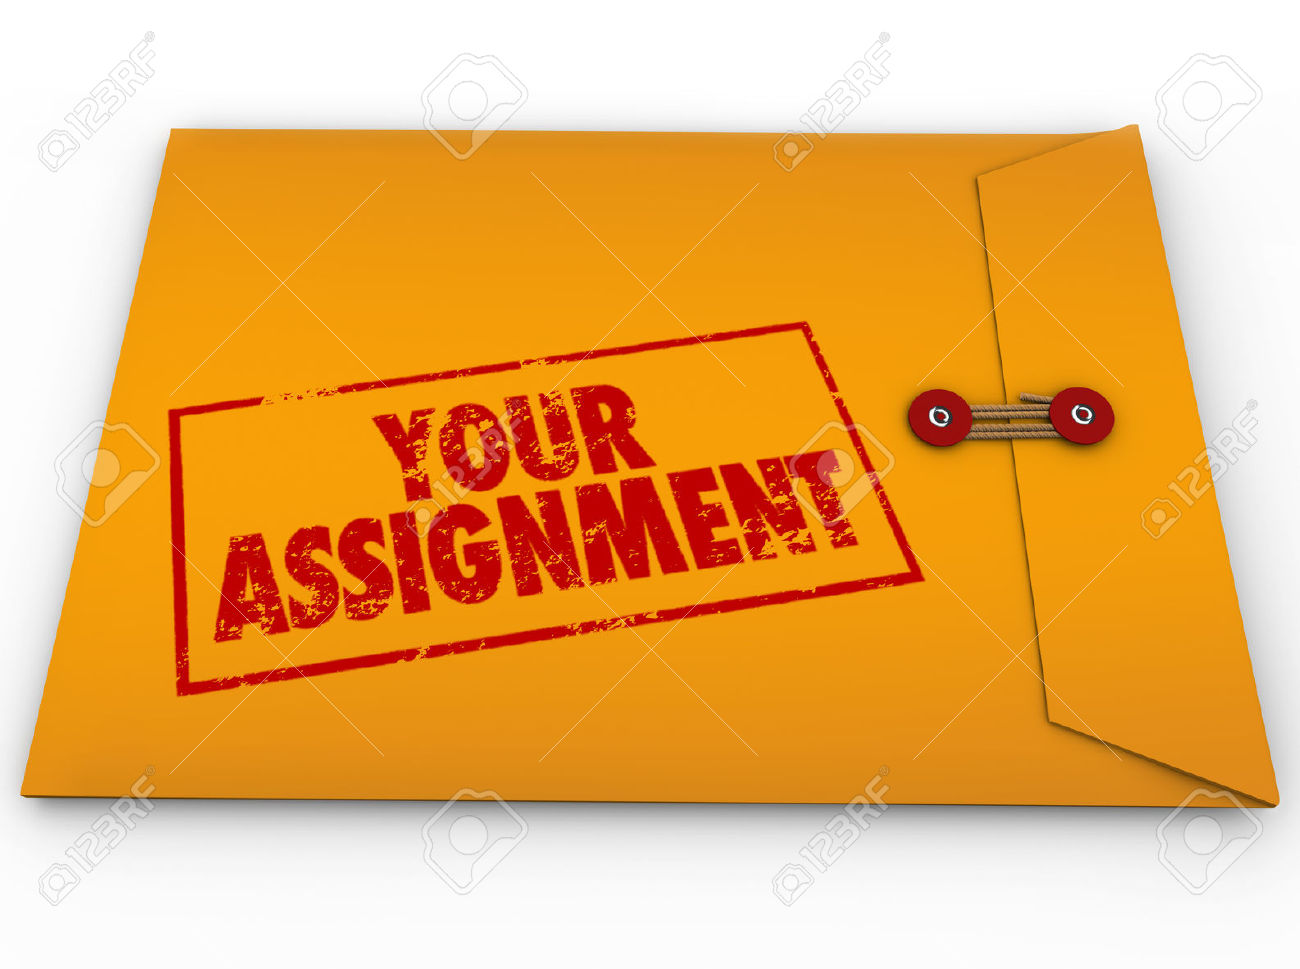 accept assignment is